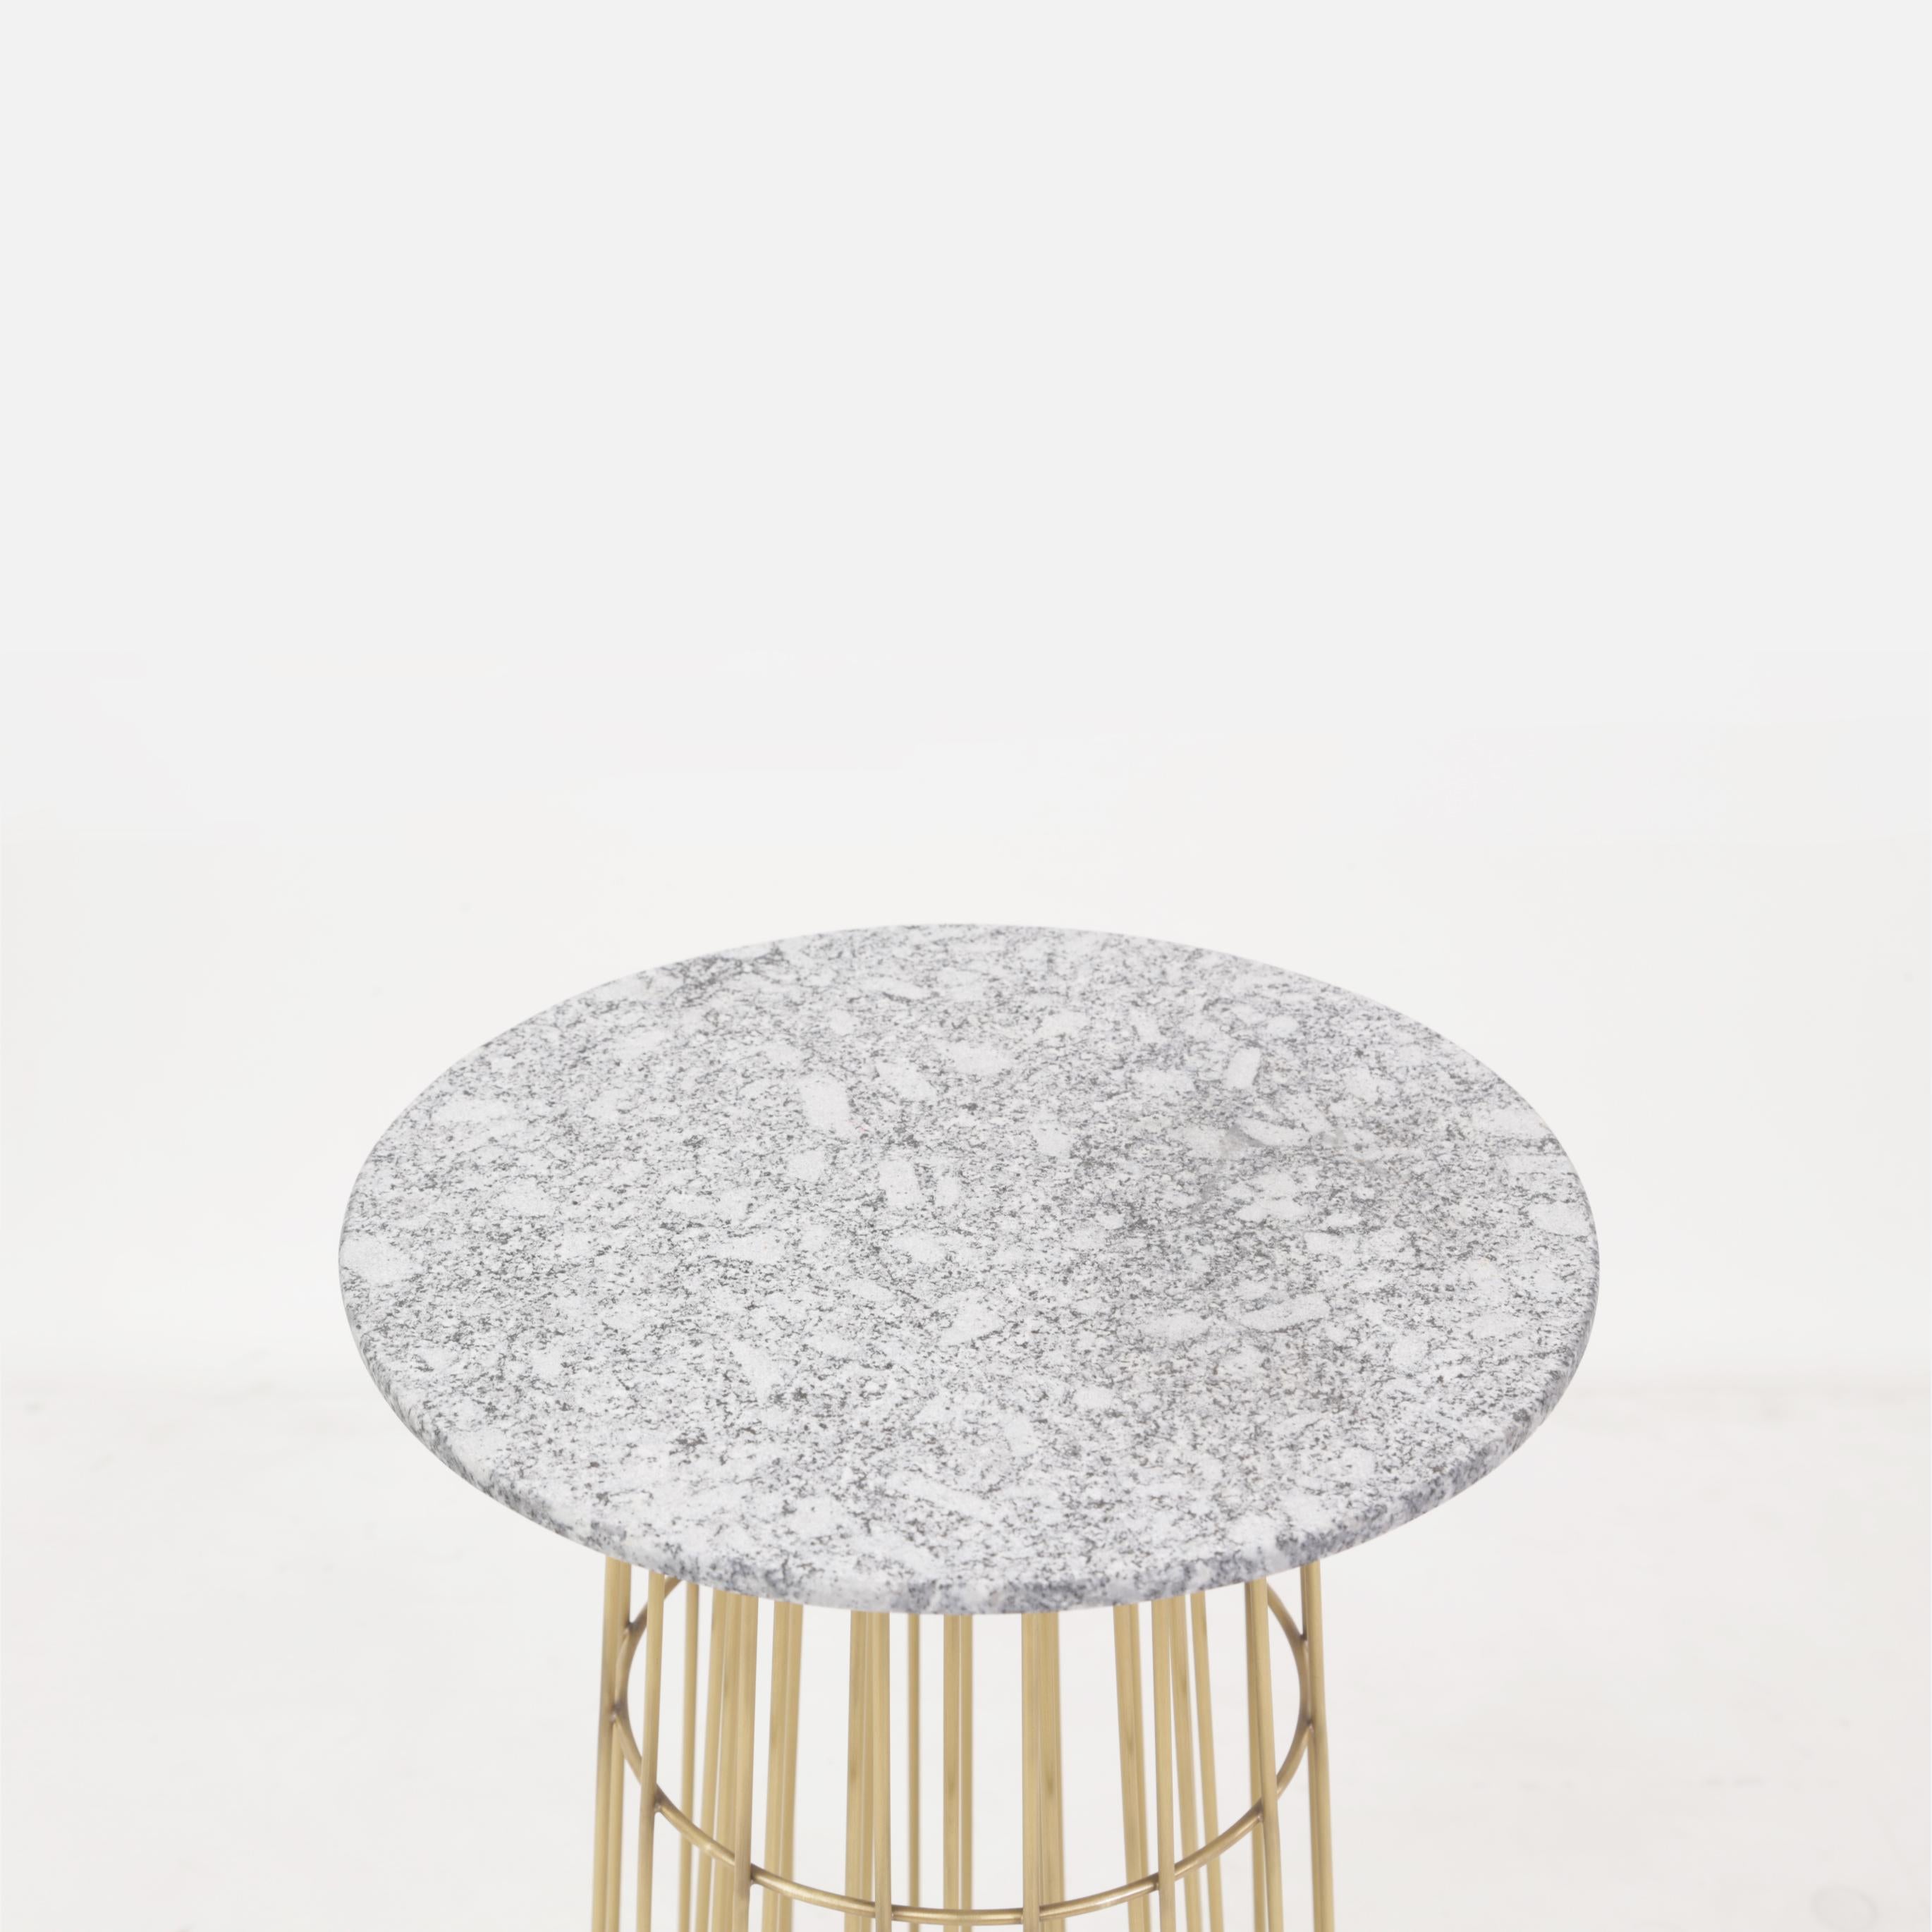 This contemporary delicate piece of art work in massive Brass and Brazilian granite Stone. The object was put on exposition in São Paulo and Paris, and was selected to appear in fashion and design review as Casa Vogue Brazil.

The table is made of